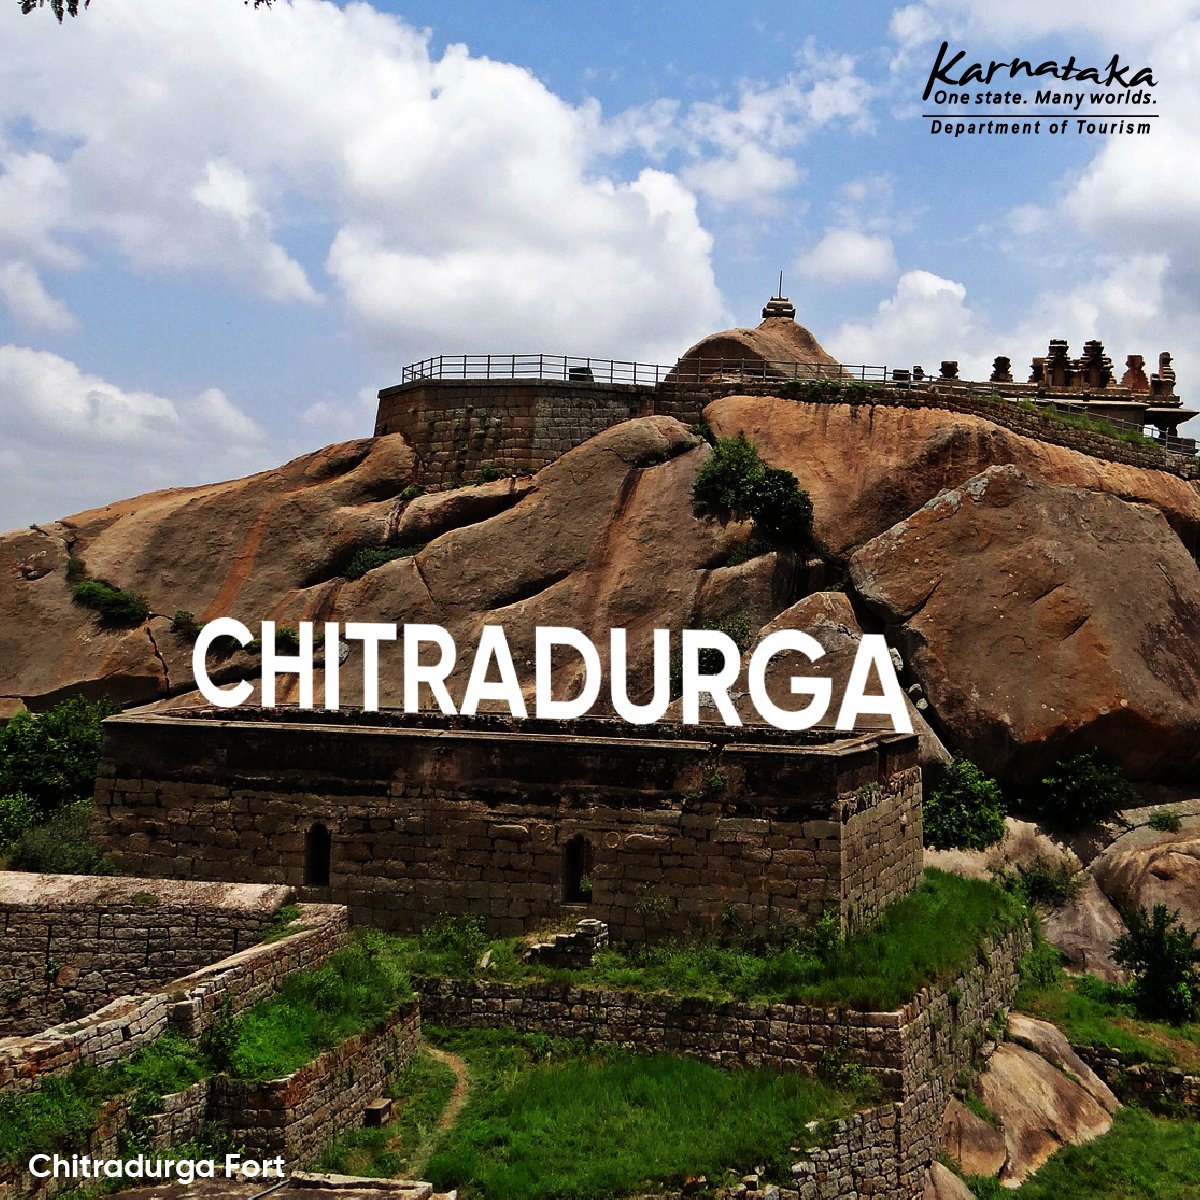 Karnataka Tourism on X: This weekend, let your mind travel and take a trip  to the Chitradurga Fort! The supposedly impregnable fortification dates  back to the 18th century. Trace back the turbulent